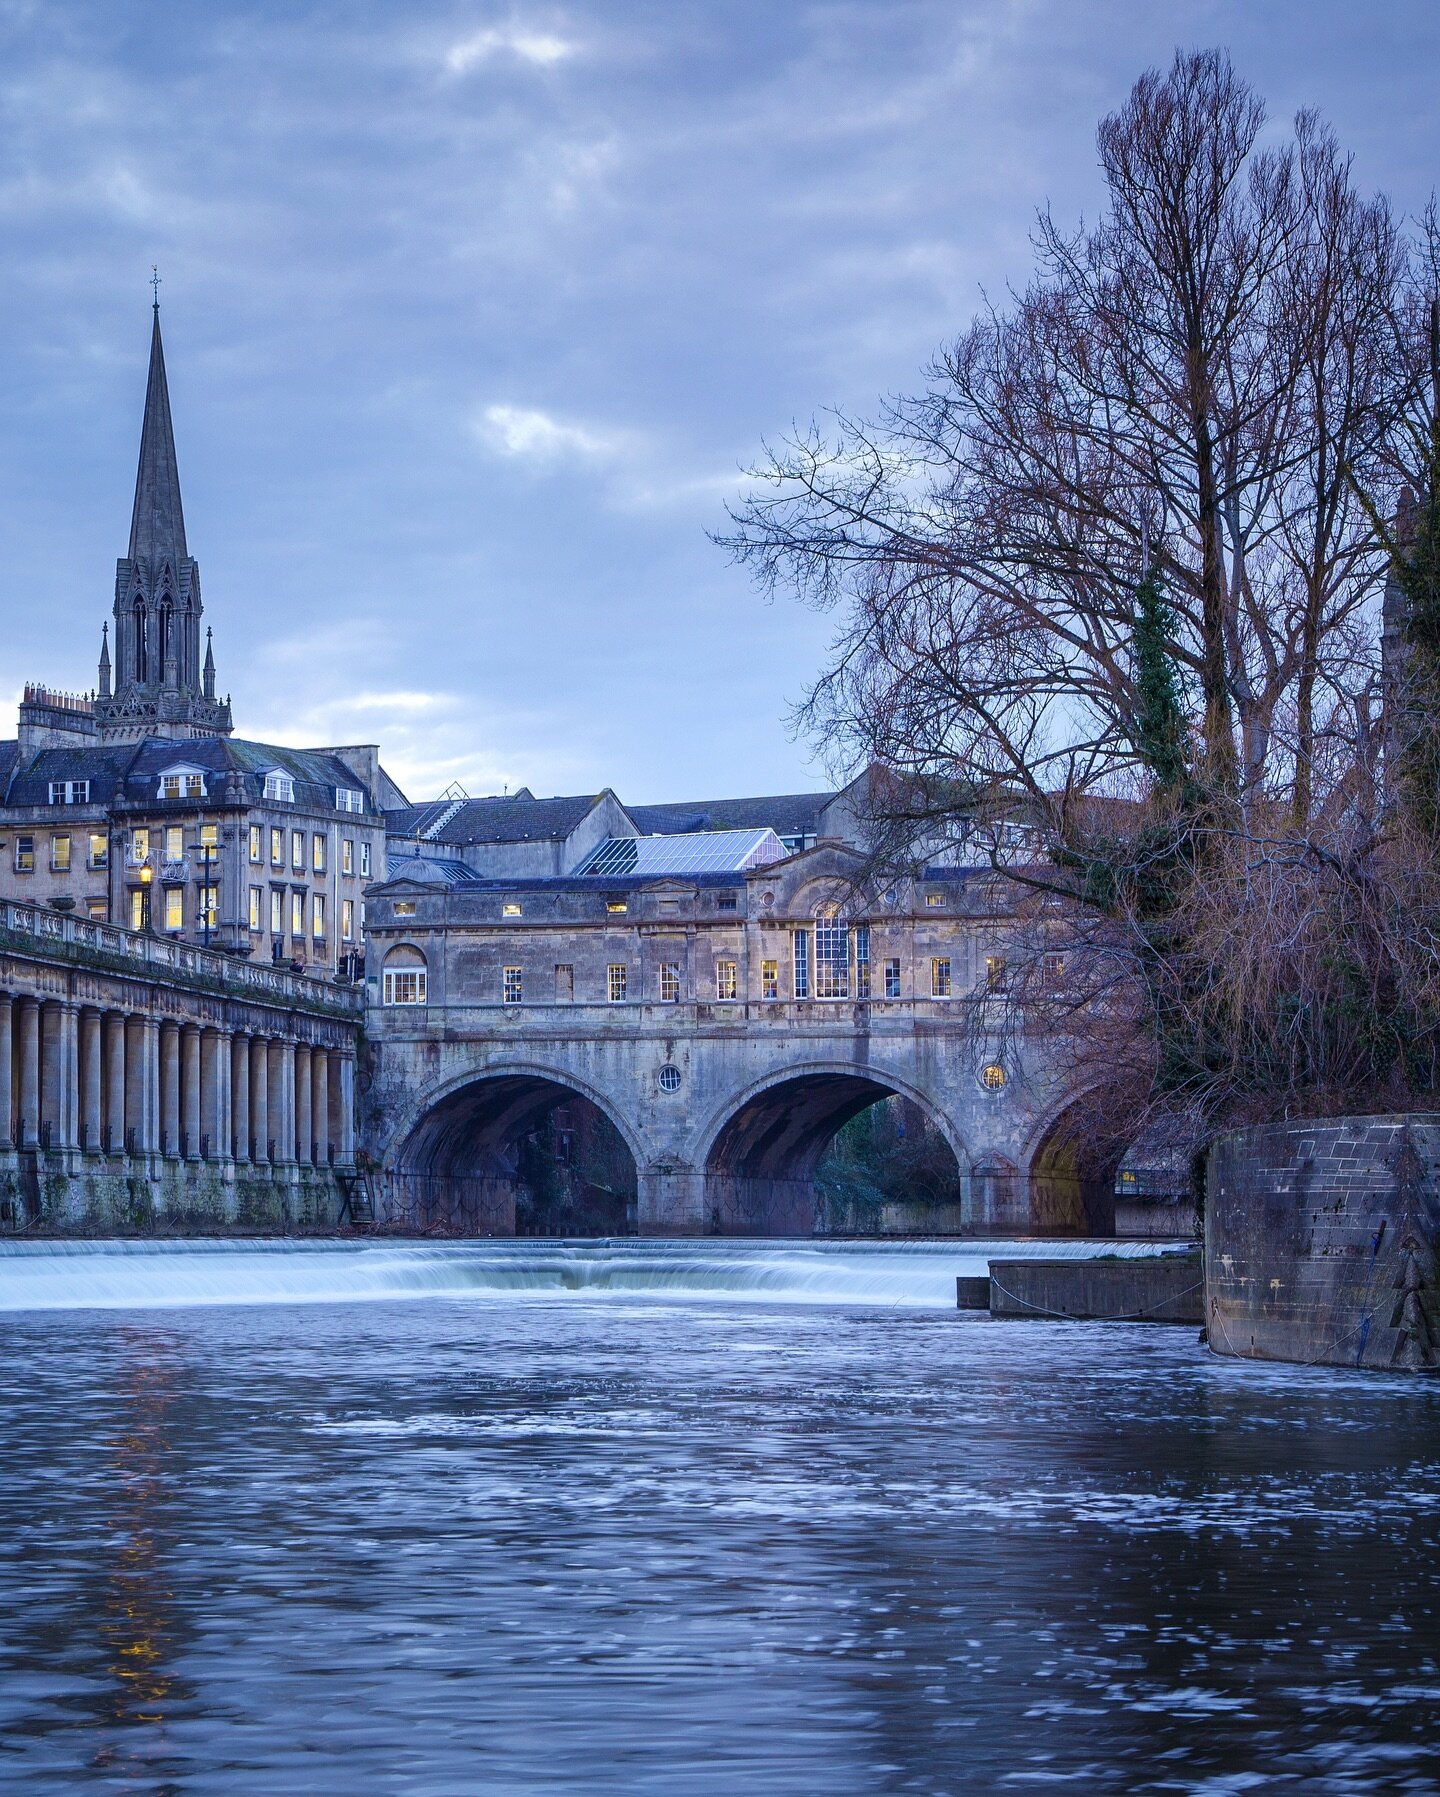 These are the right kind of winter blues - the gorgeous tones of evening at Pulteney Bridge create a magical atmospheric feeling as street lights appear and houses illuminate windows from within. Take an opportunity to explore the twilight city and y